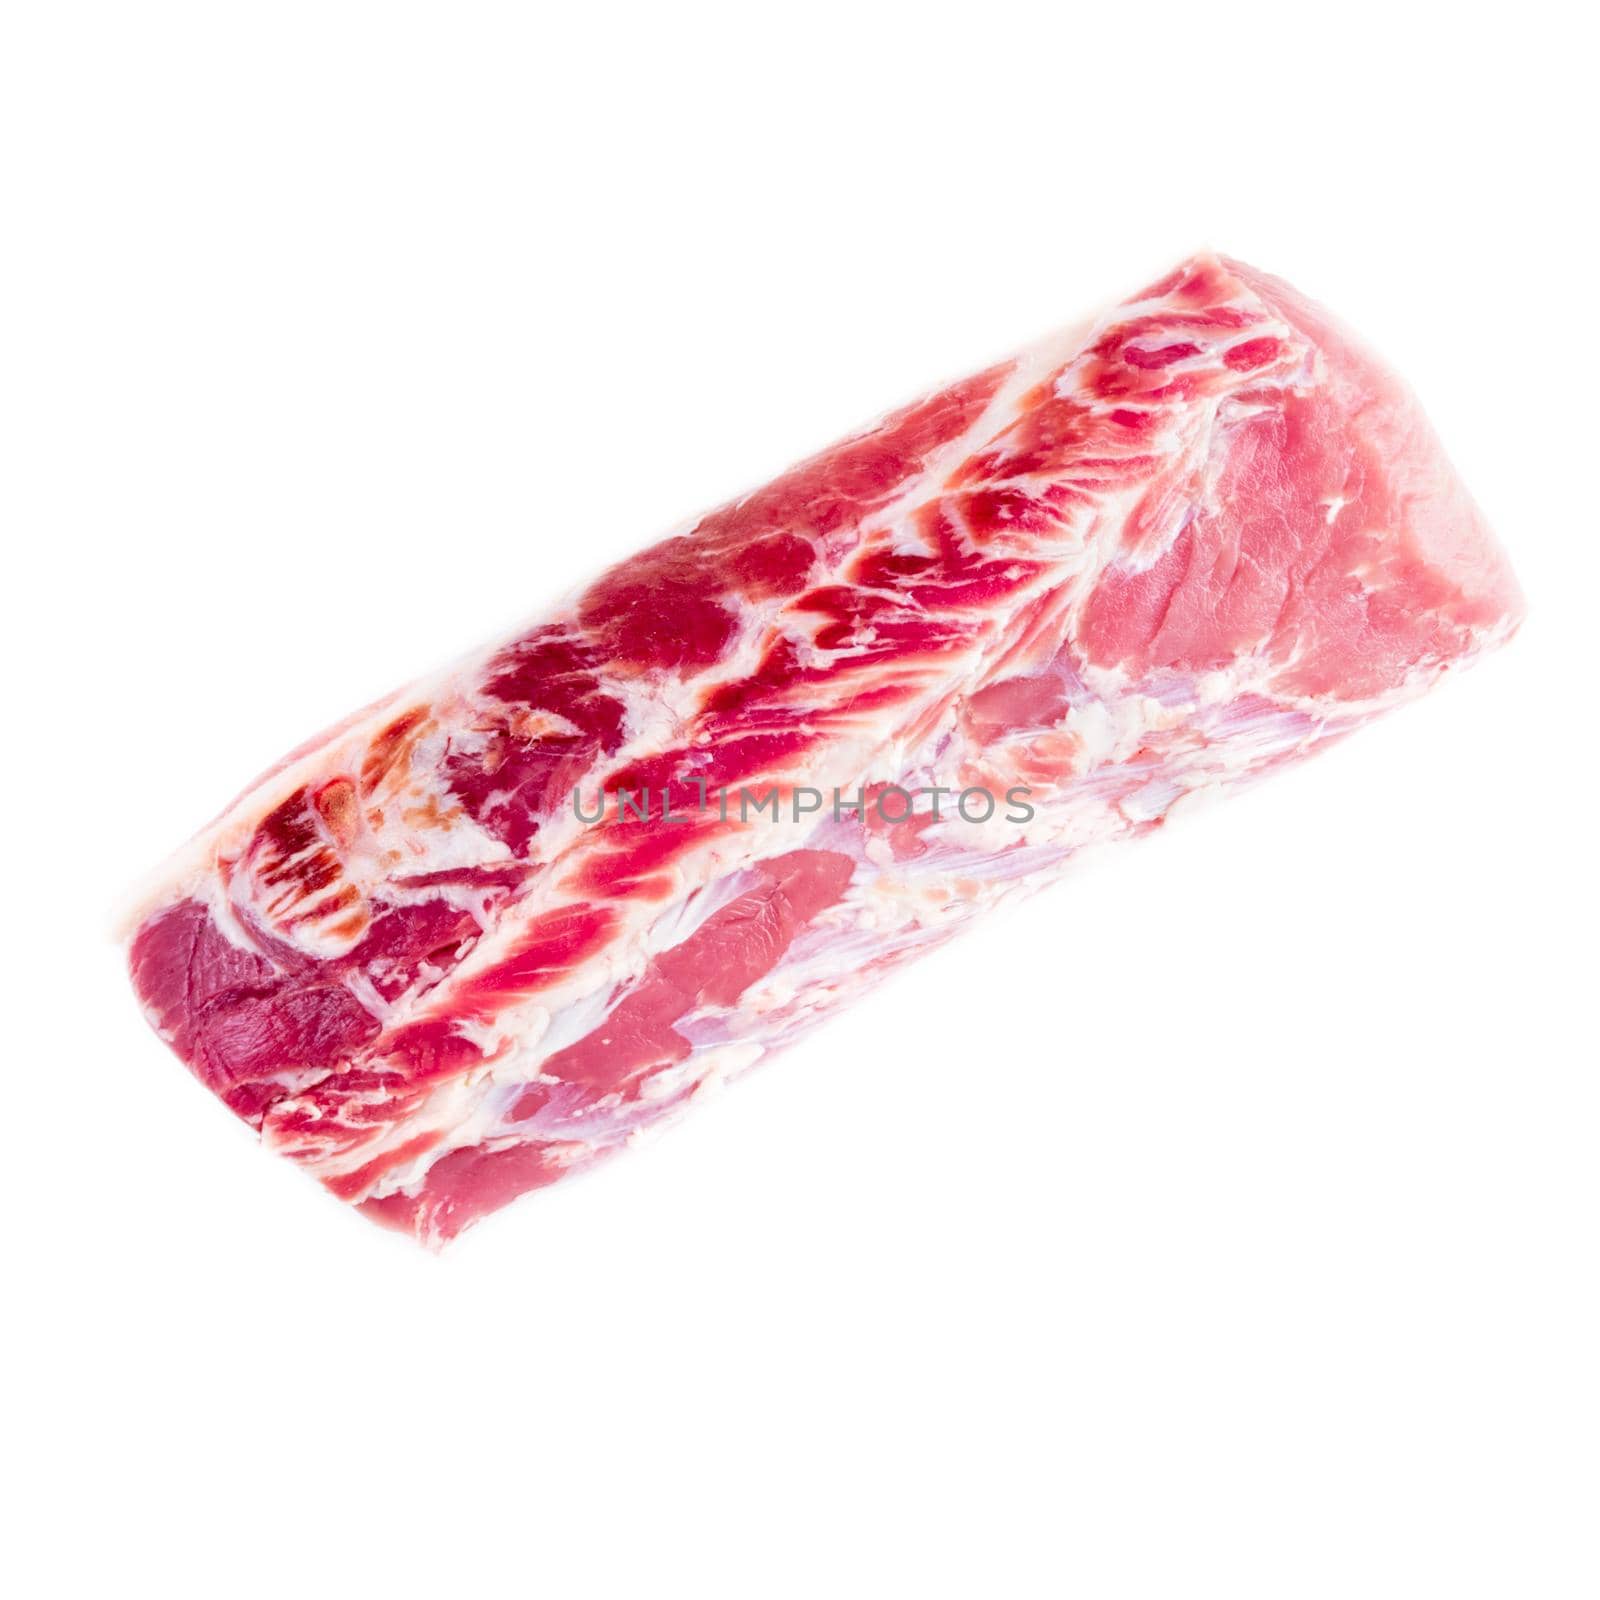 large piece of meat, raw pork carbonate fillet isolated on white background, top view by NataBene